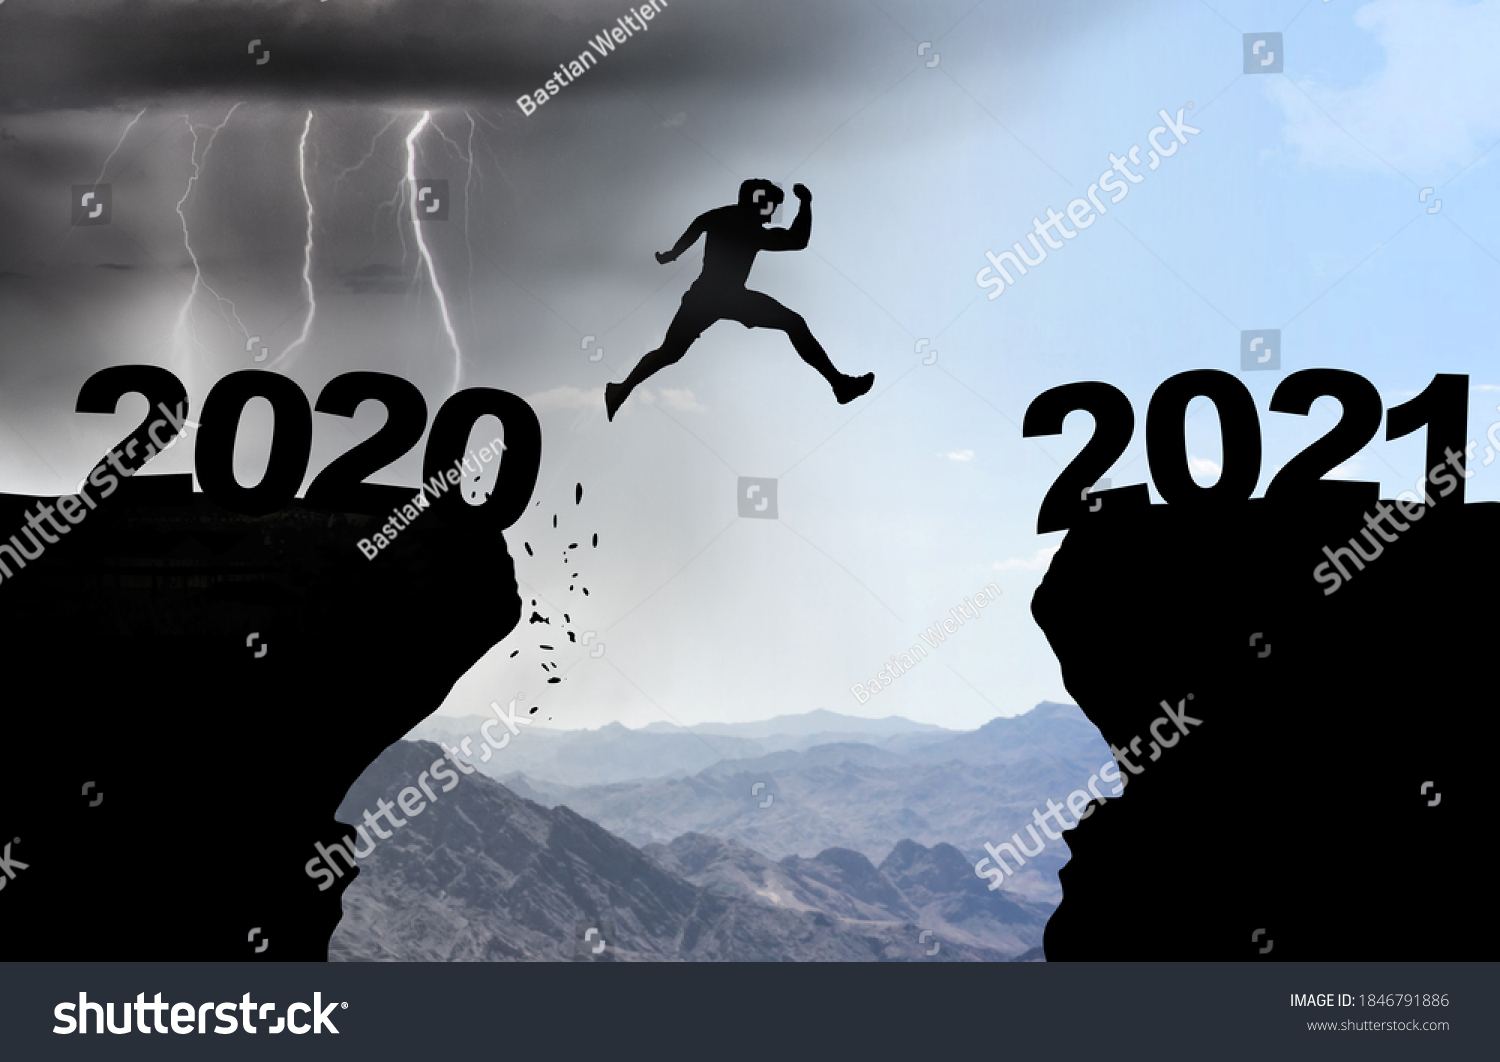 Jumping over abyss Images, Stock Photos & Vectors | Shutterstock